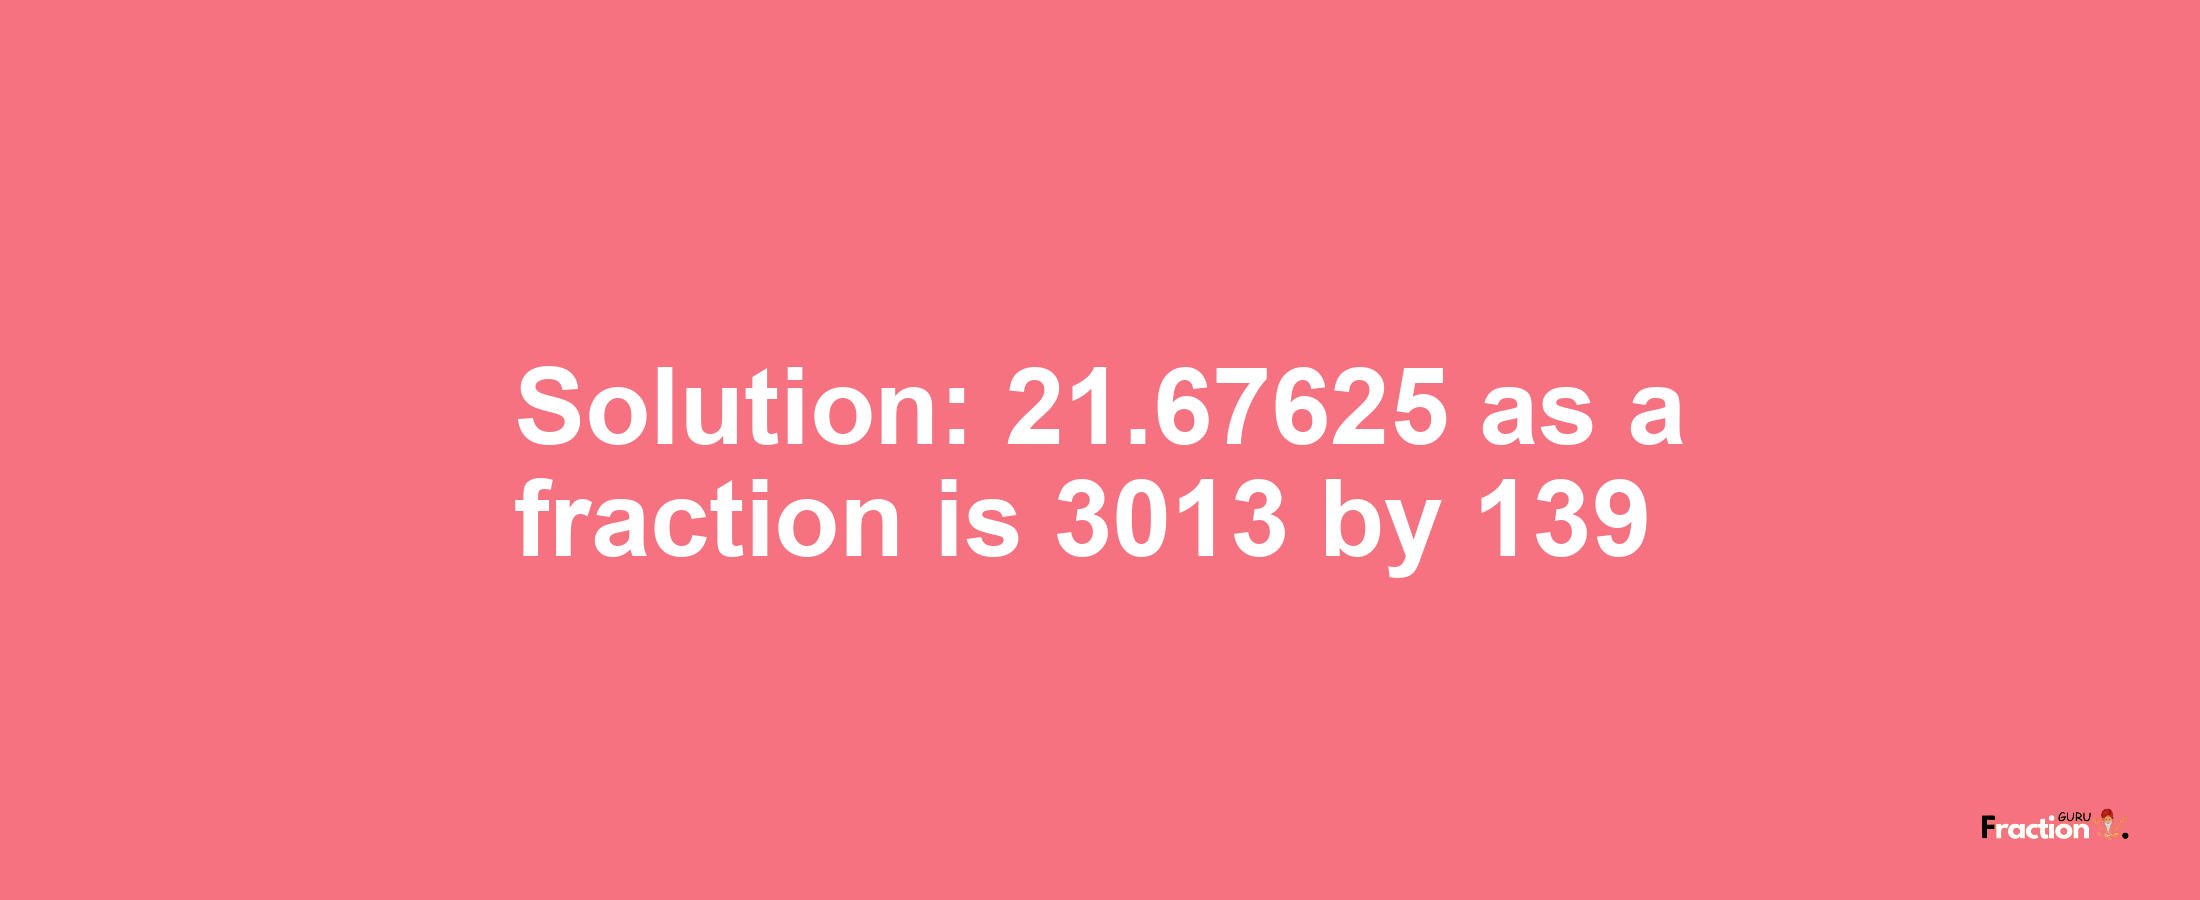 Solution:21.67625 as a fraction is 3013/139